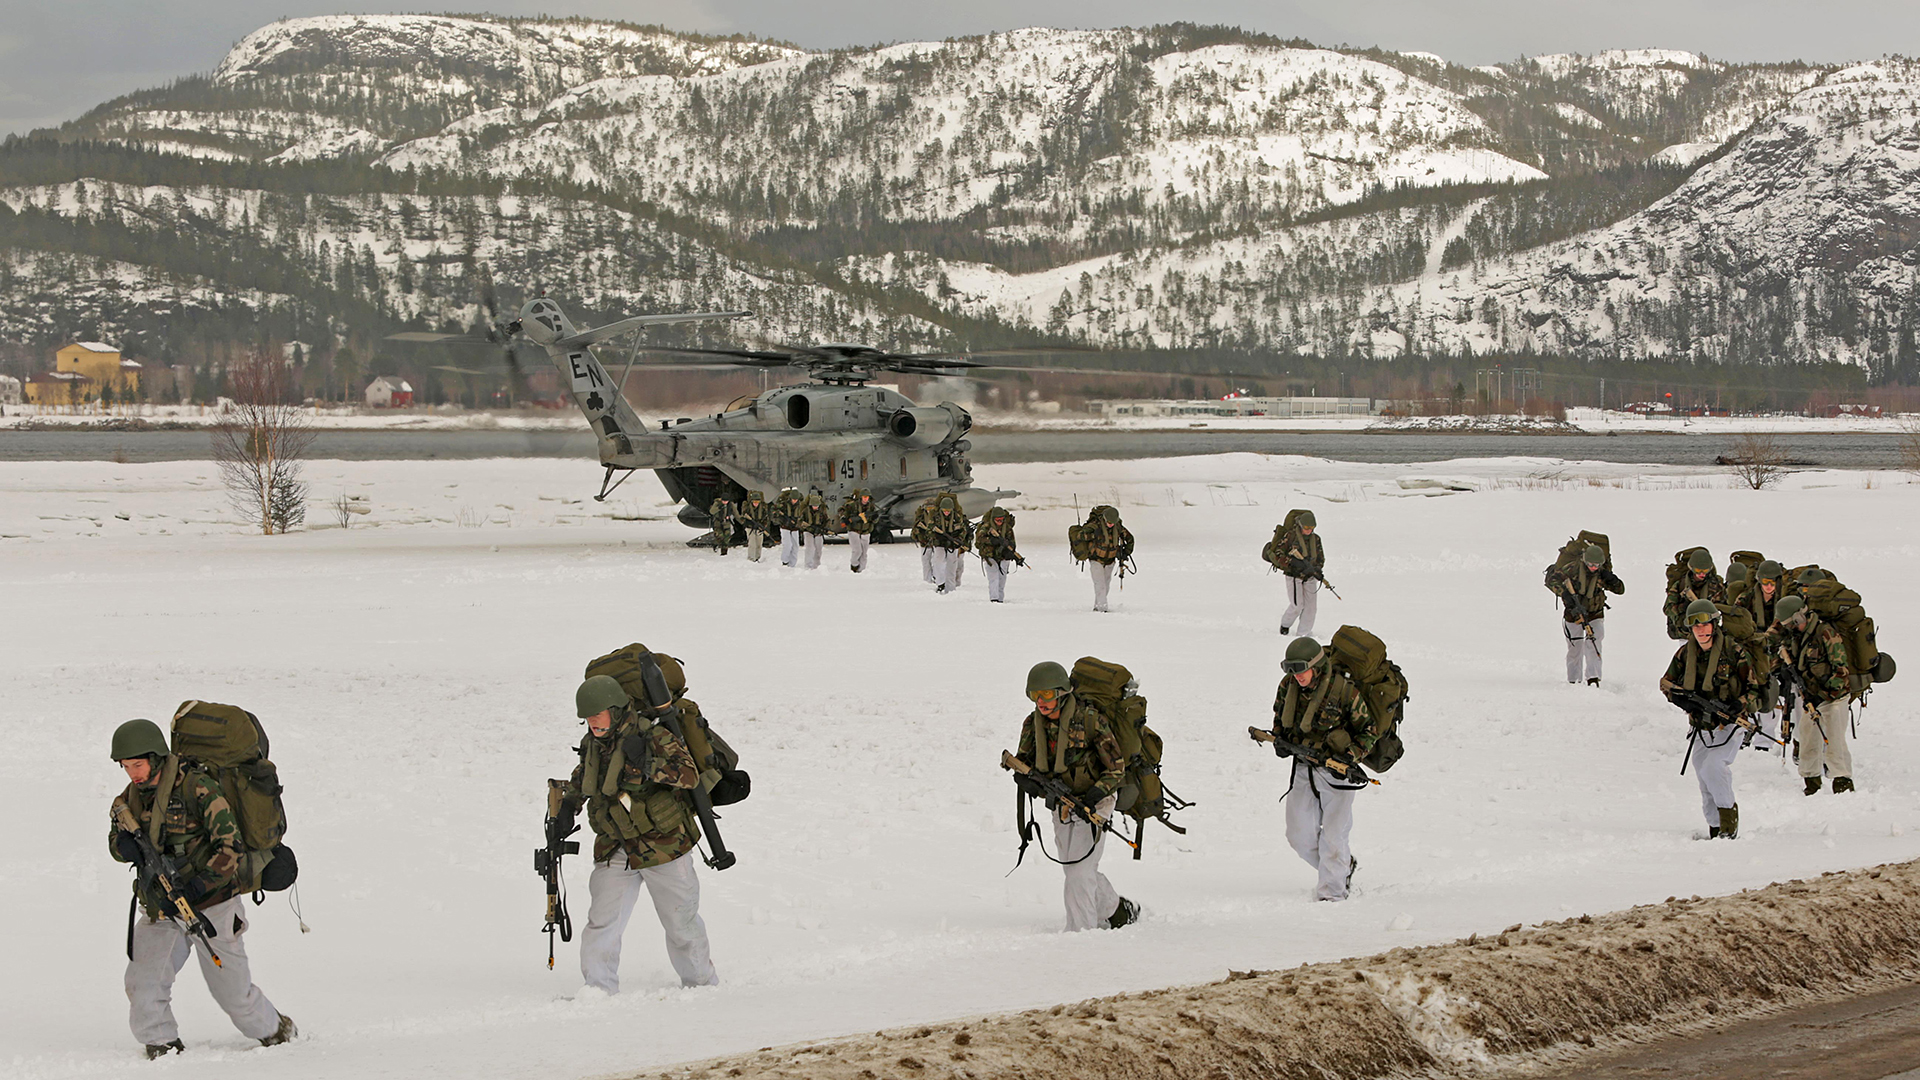 More than 500 Finnish soldiers went to Norway for NATO-related exercises